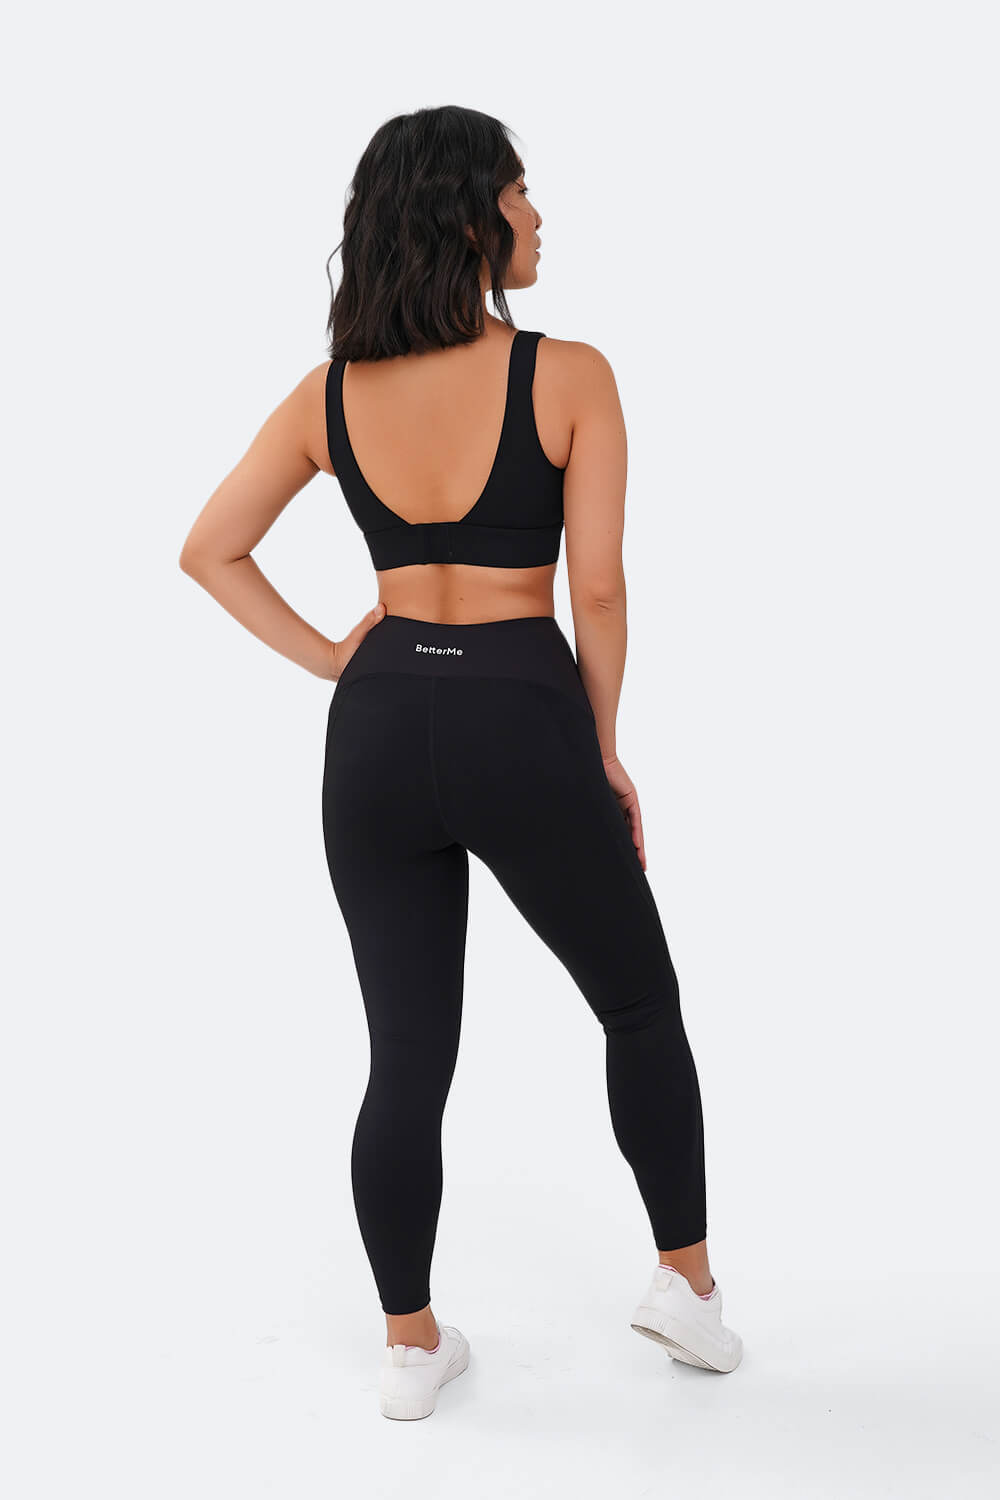 BetterMe 7/8 High-Waisted Leggings in Black | Slimming and Bum ...